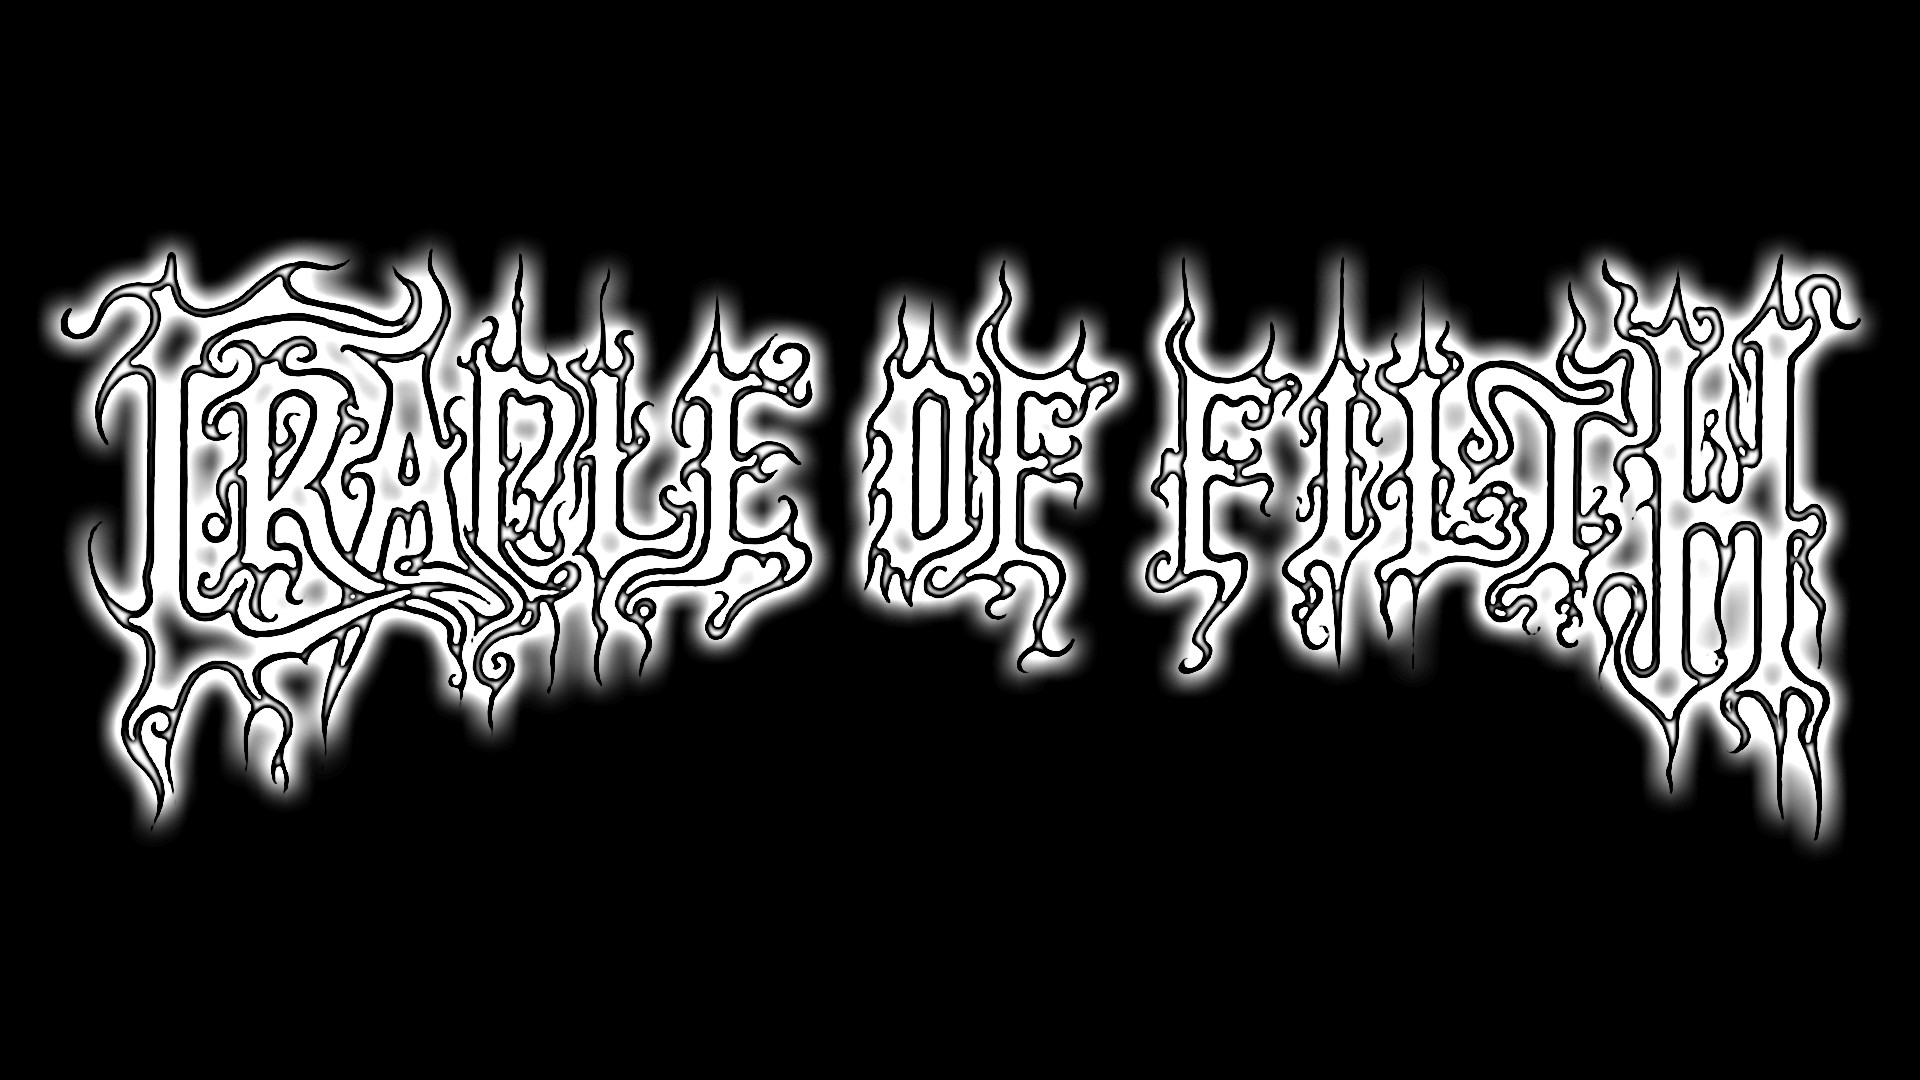 cradle, Of, Filth, Gothic, Metal, Heavy, Hard, Rock, Band, Bands, Group, Groups, Logo Wallpaper